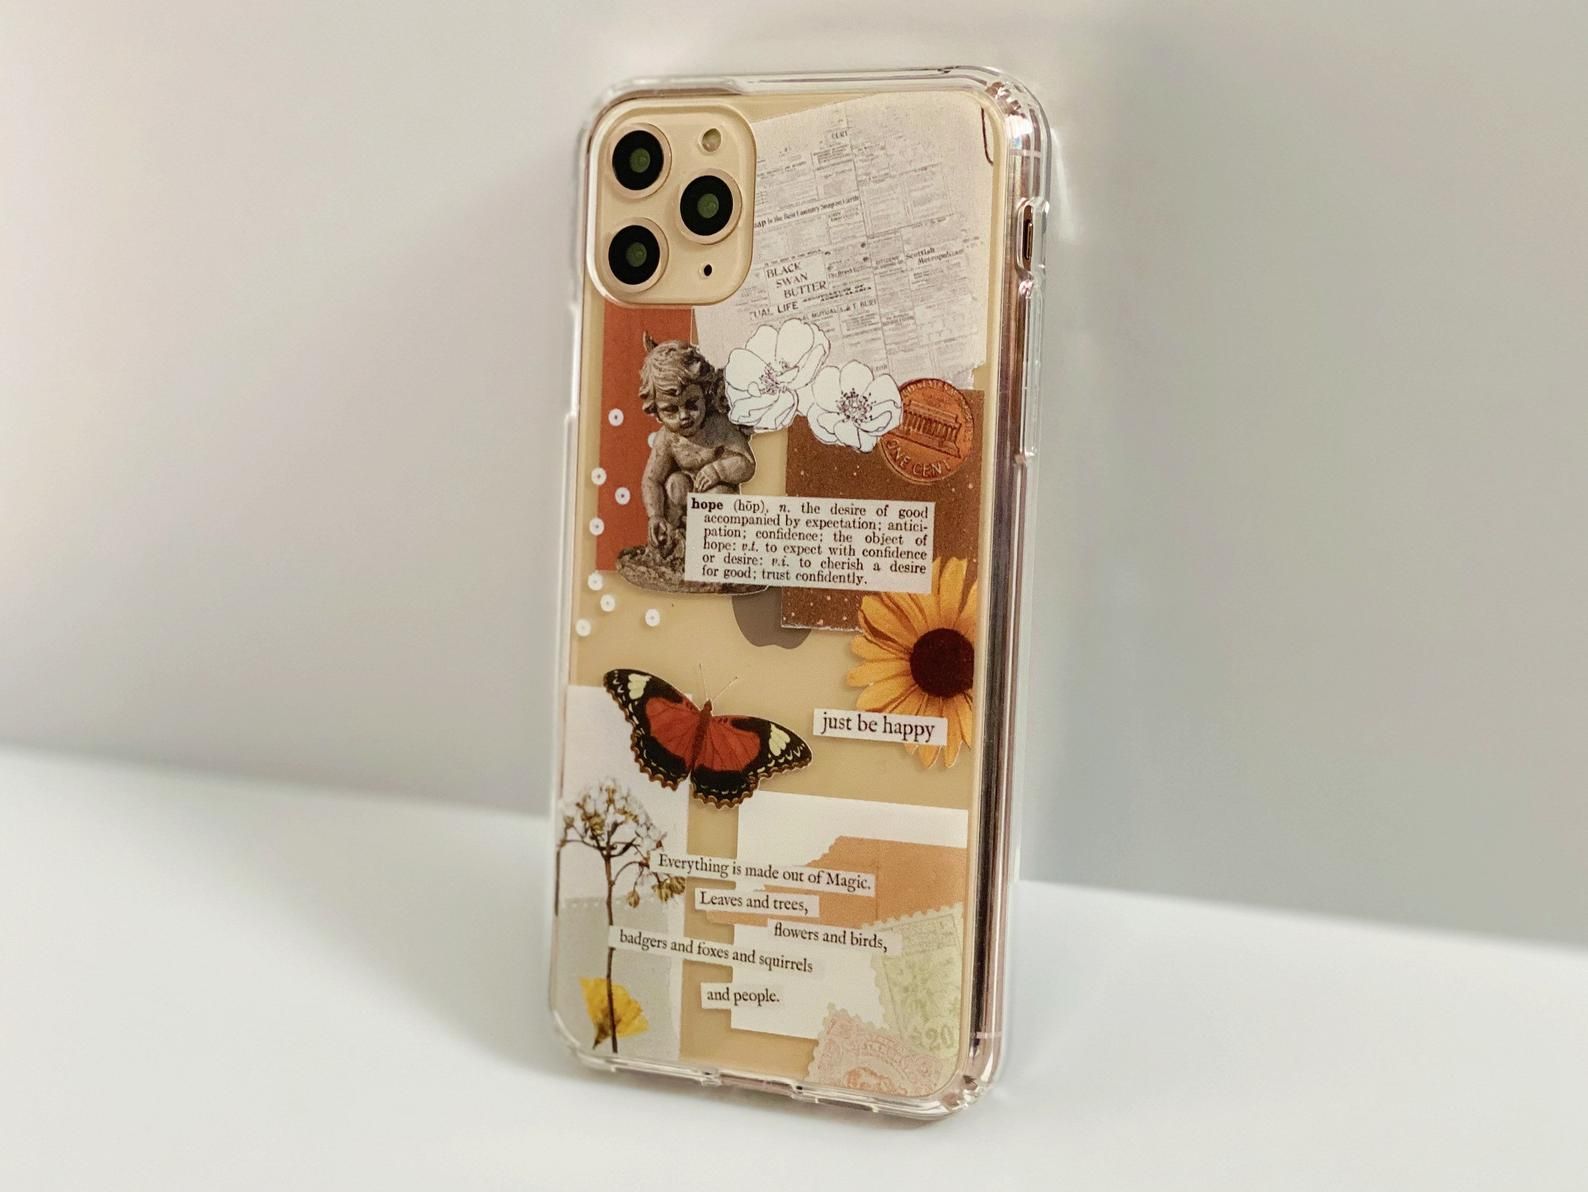 How To Make Your Phone Look Aesthetic | CellularNews